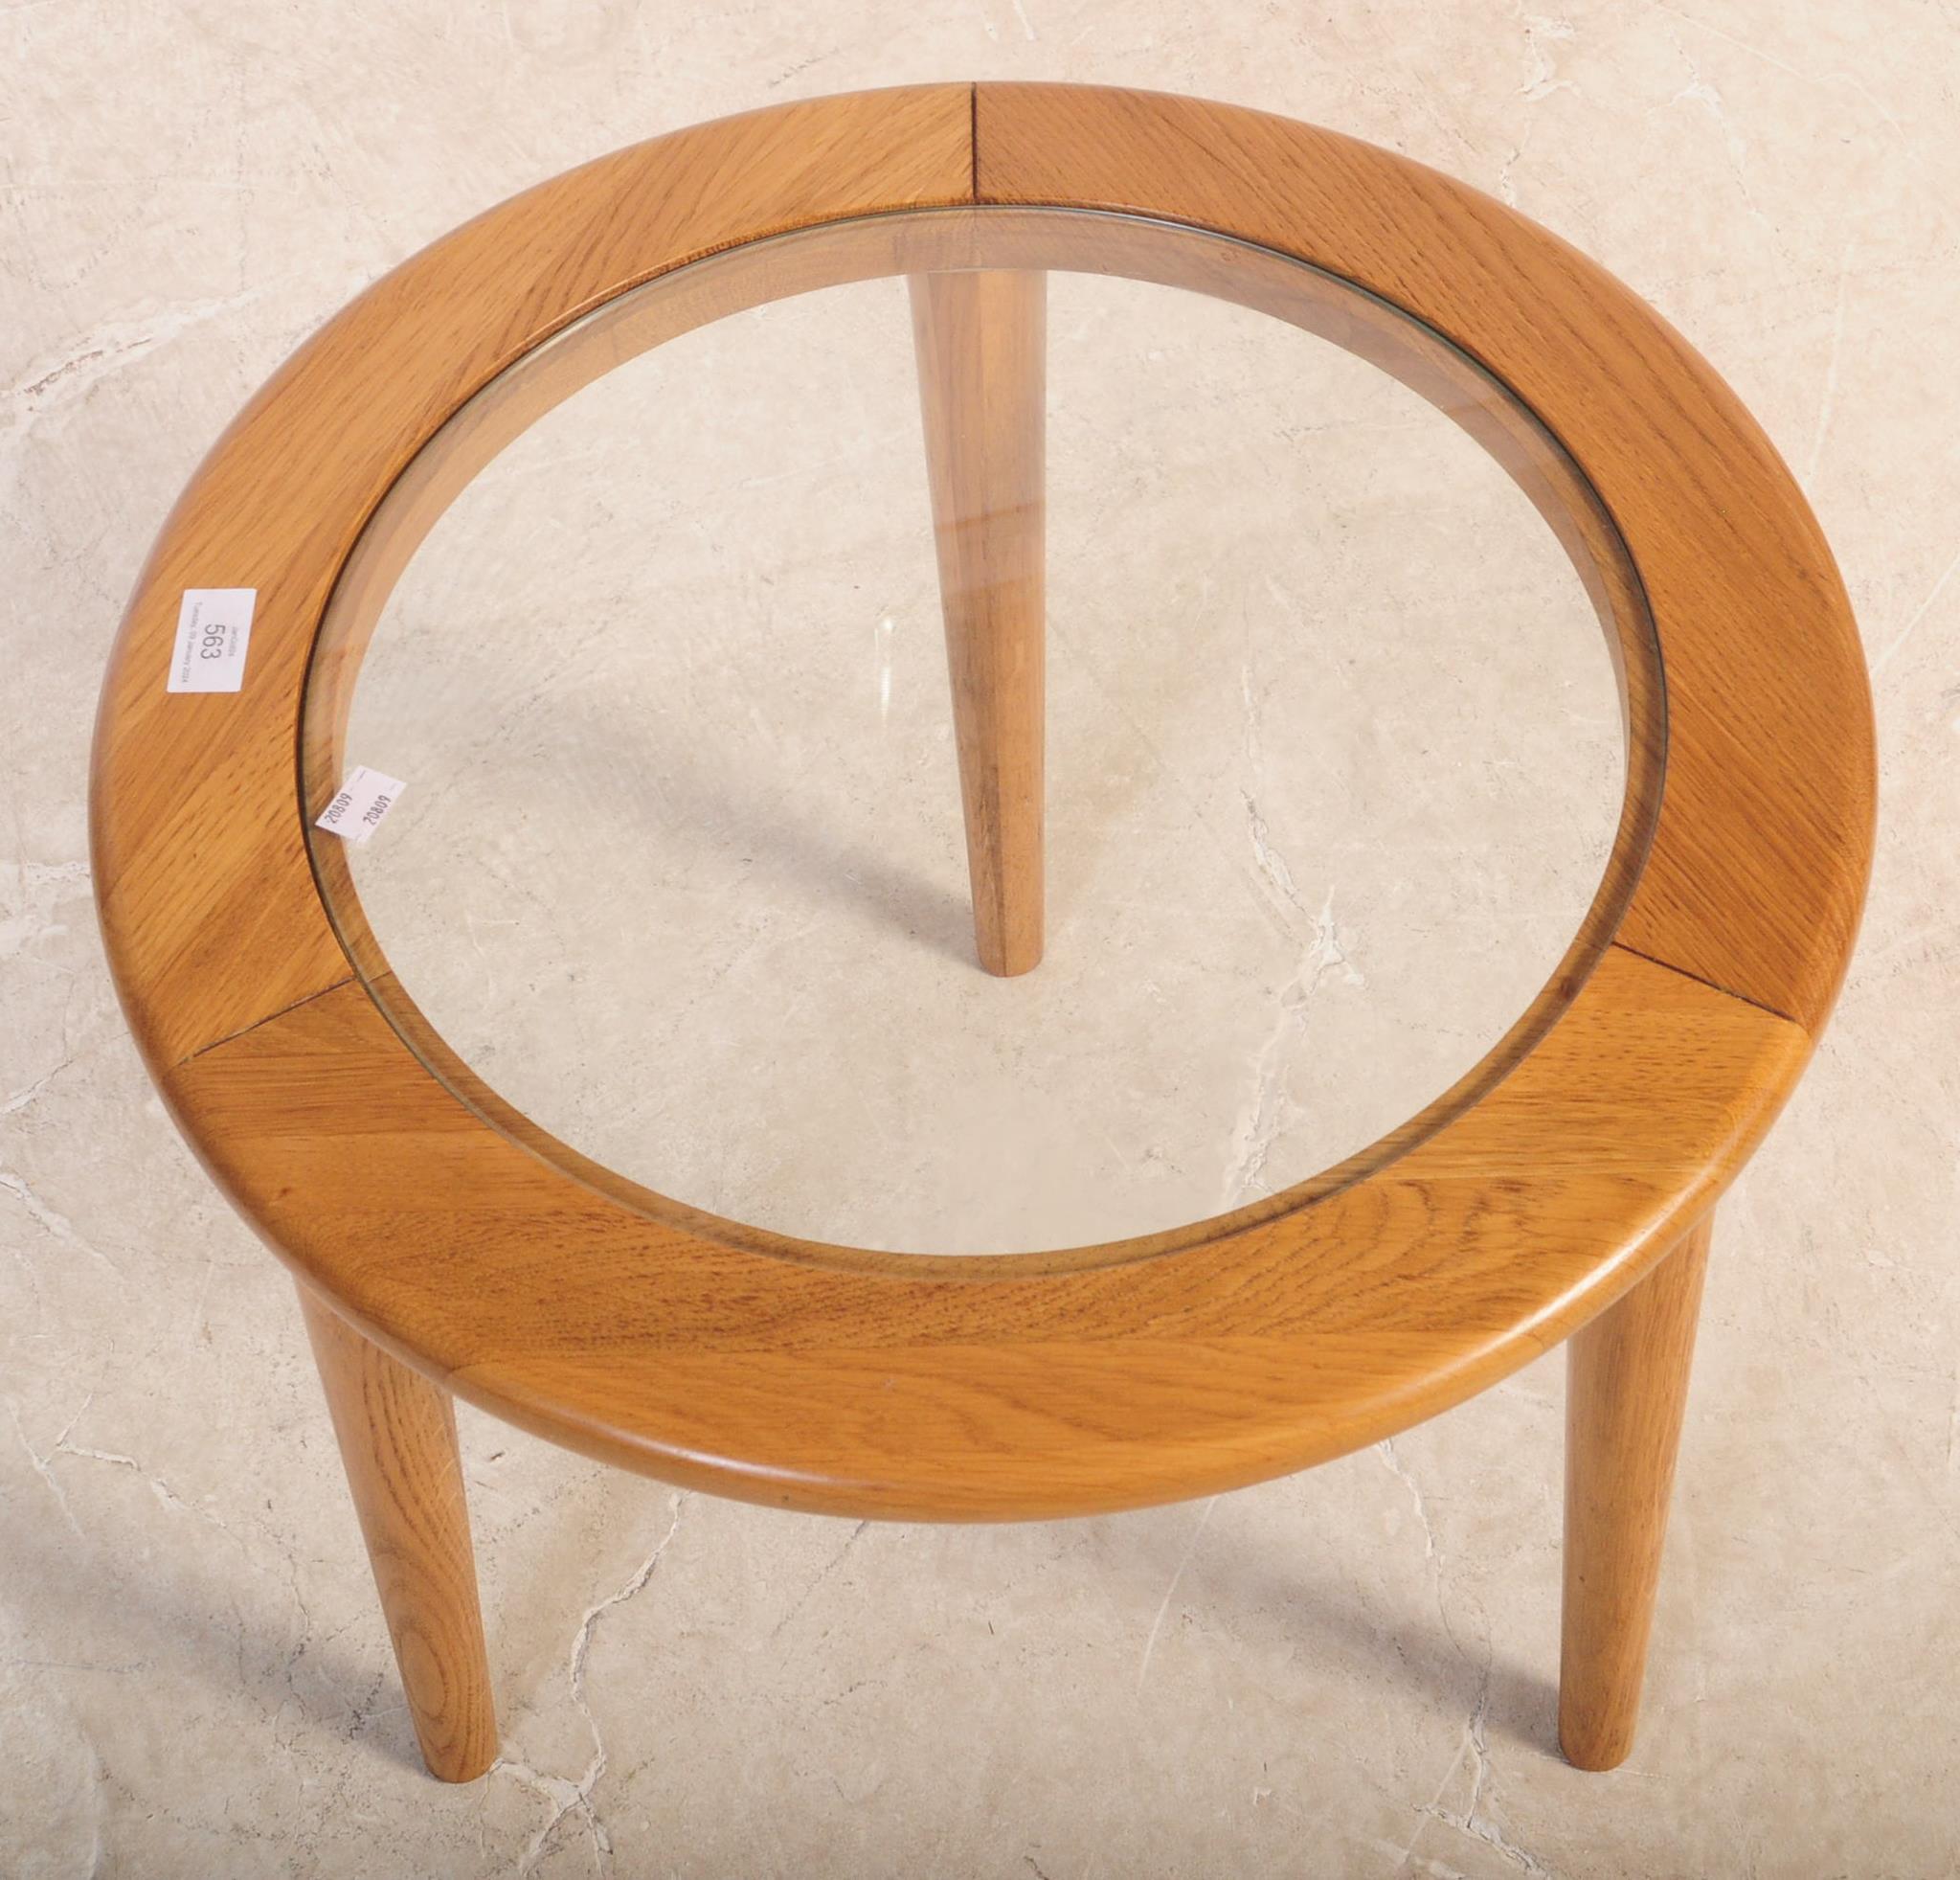 CONTEMPORARY OCCASIONAL GLASS & WOOD CIRCULAR TABLE - Image 4 of 5